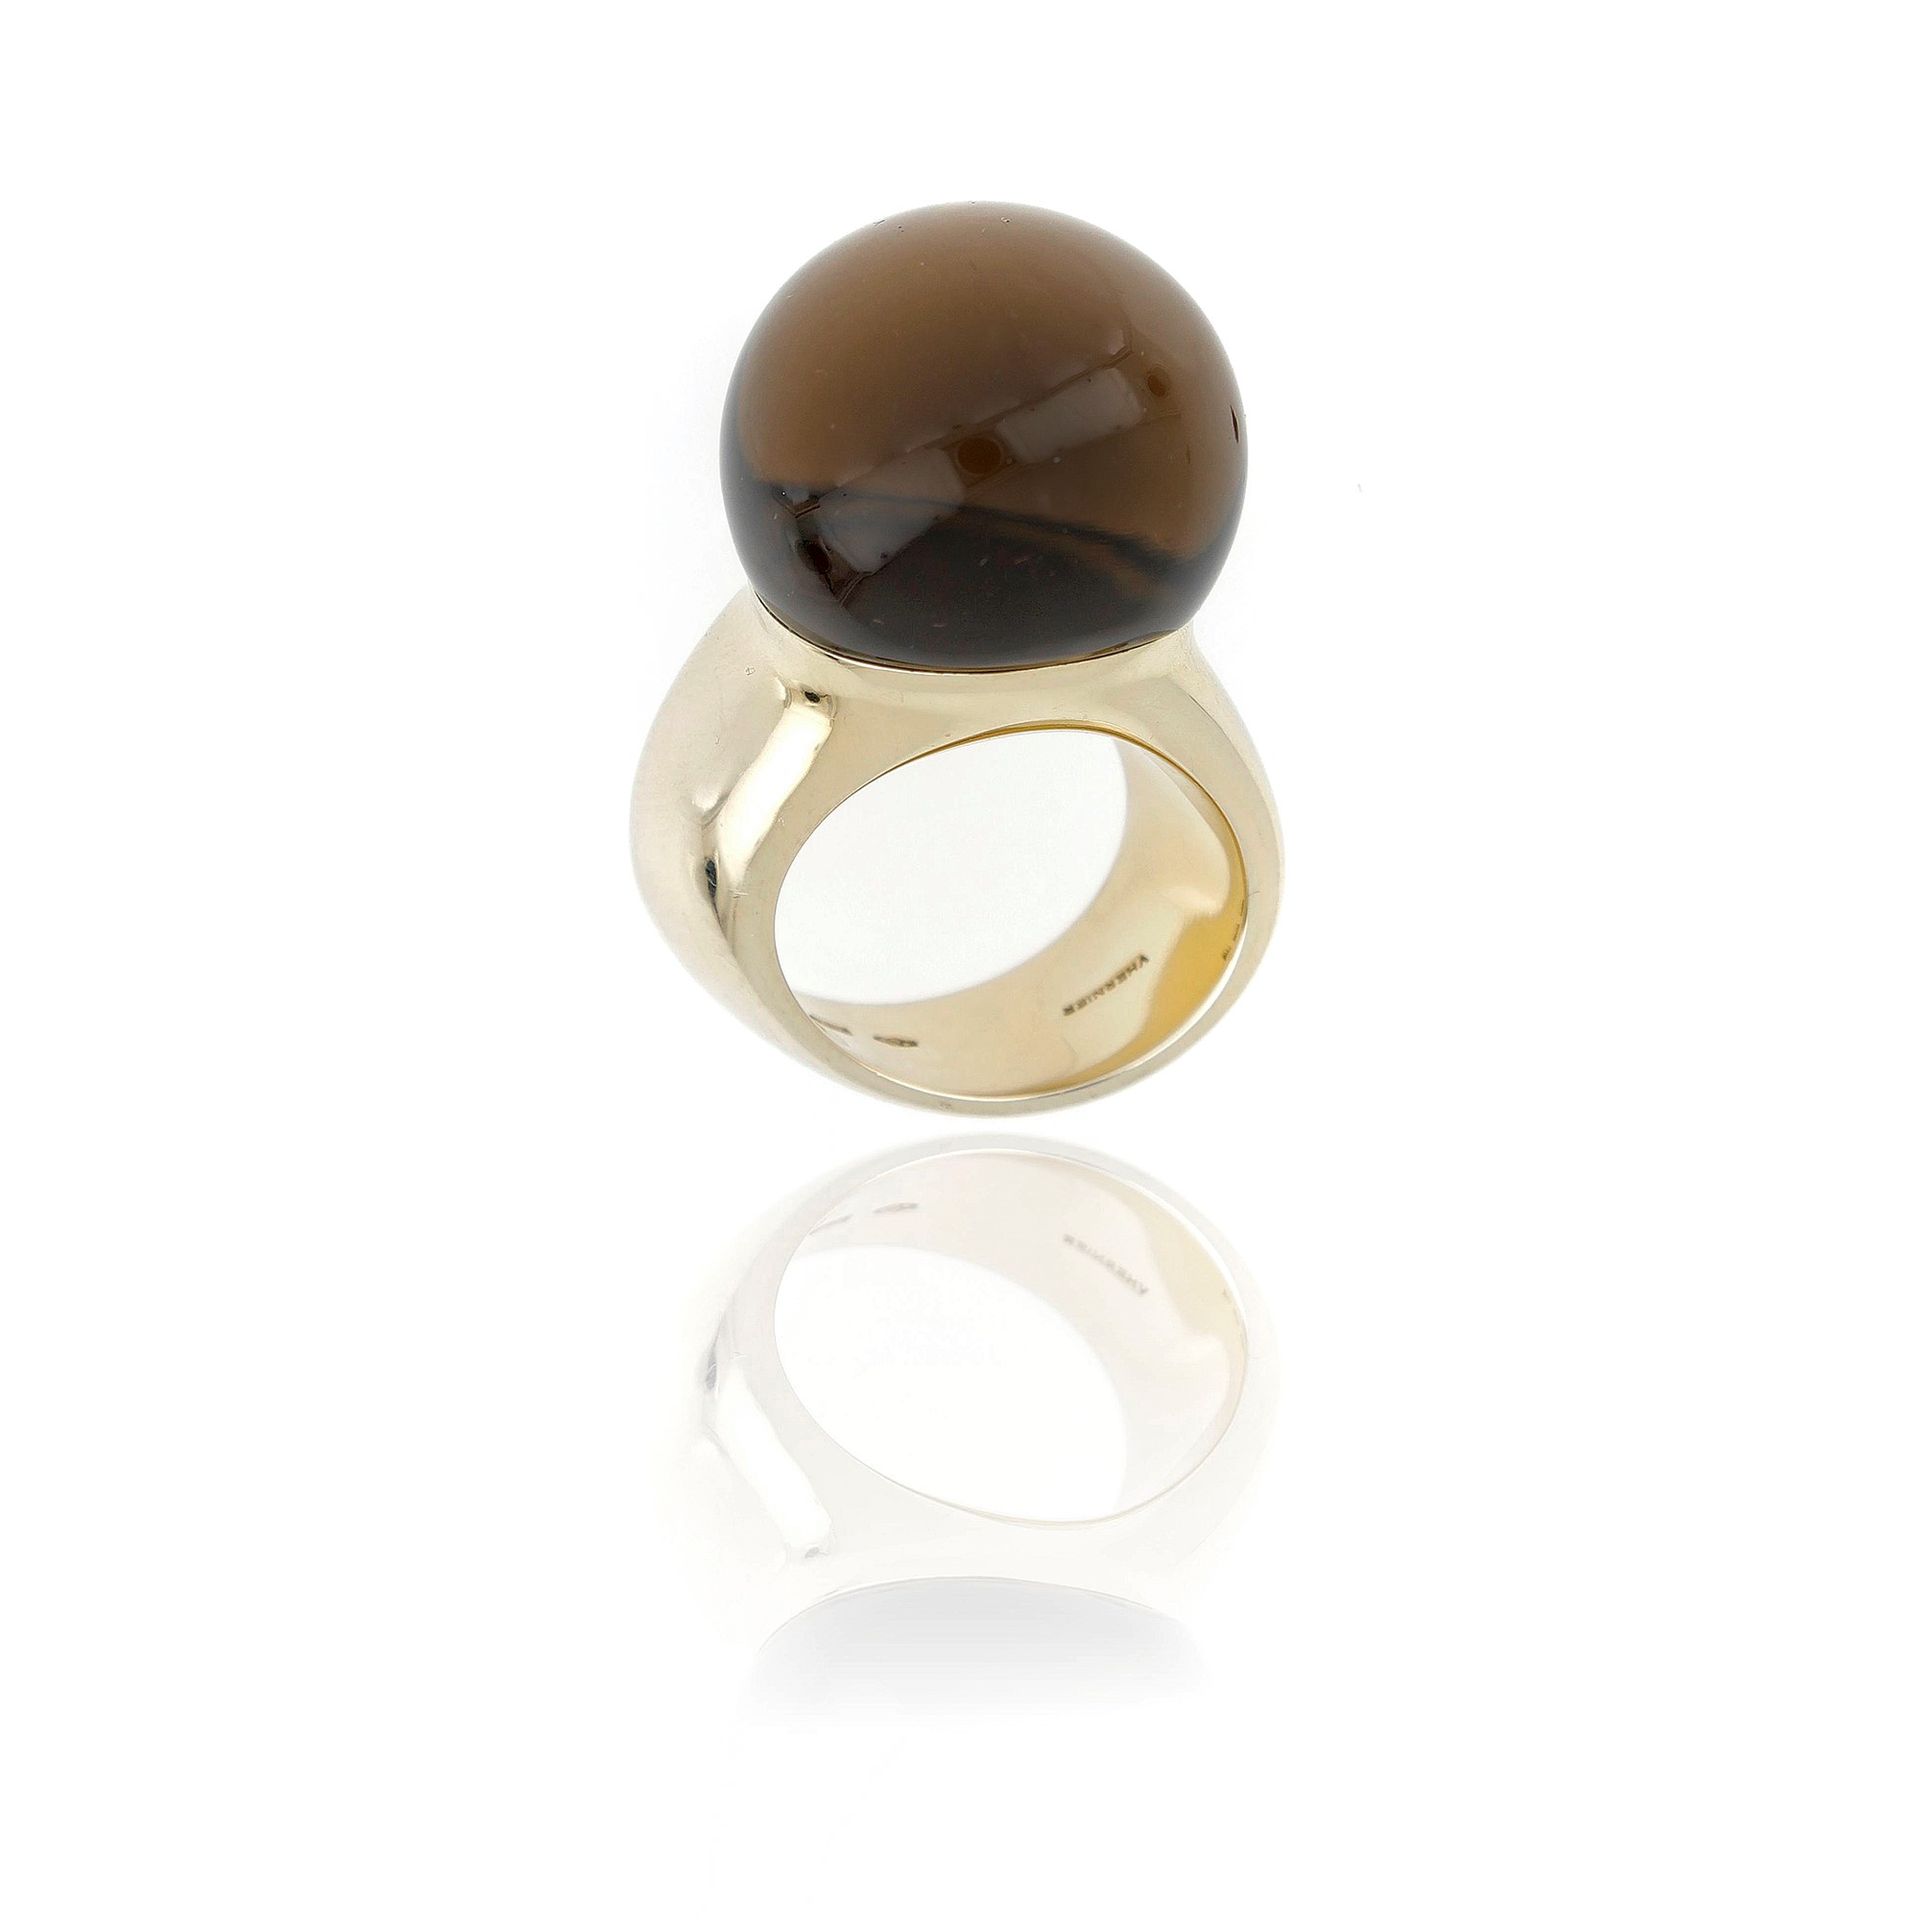 Null Verniher ring in 18kt yellow gold with smoky quartz boule approximately 20.&hellip;